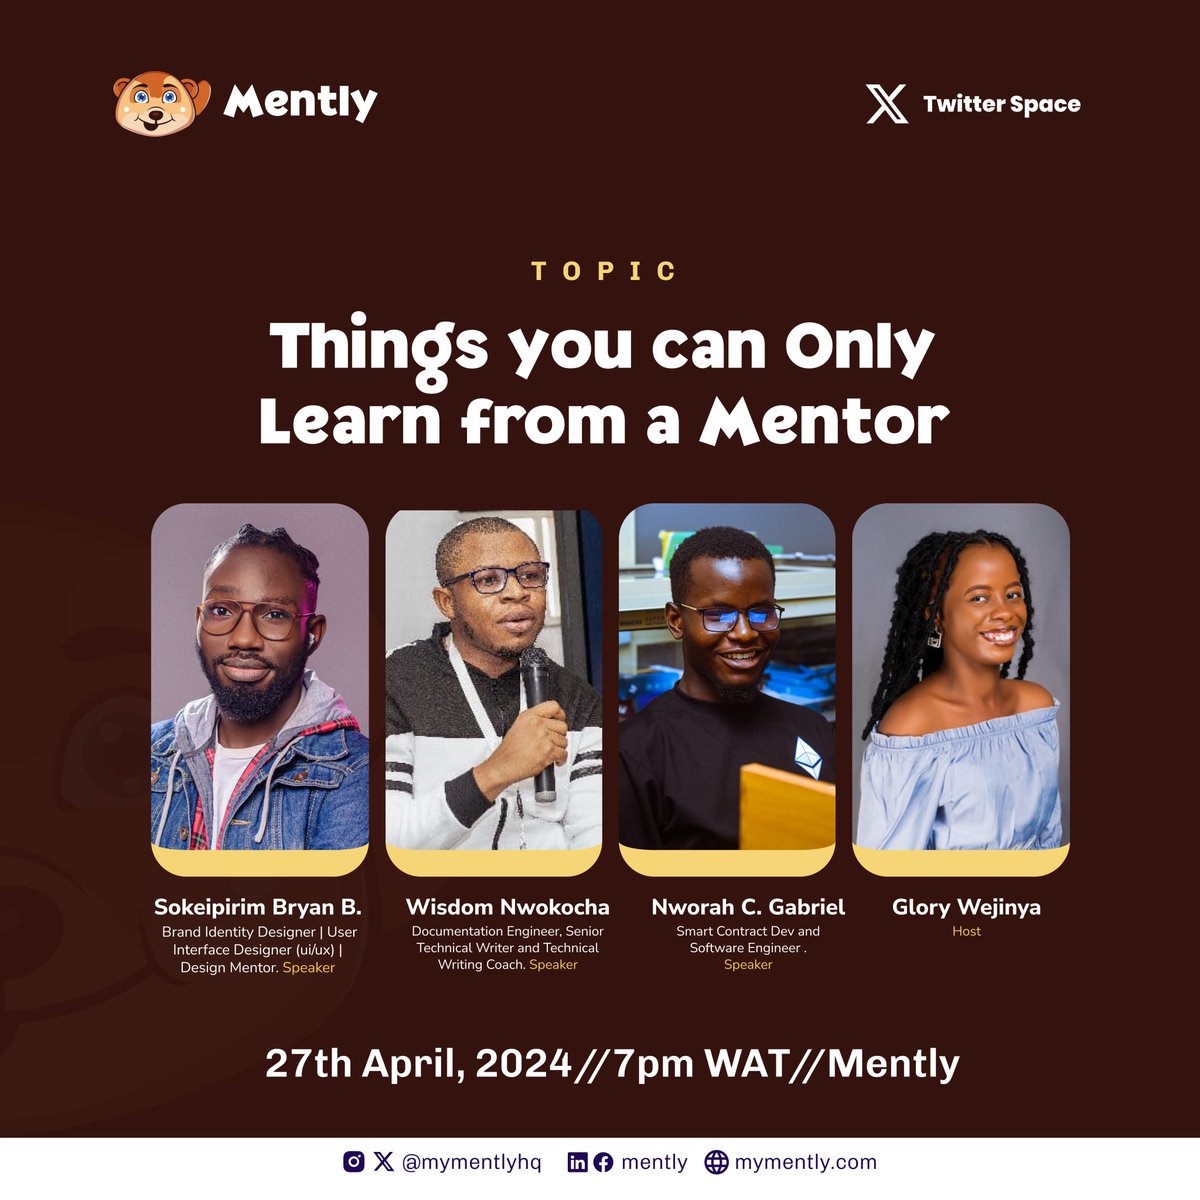 Mark your Calendars for April 27th, as we dissect this exciting topic; Things You Can Only Learn from a Mentor. Join @Joklinztech, @bryanbenibo and @NworahGabriel as they reveal thought-provoking secrets you can only get from mentors Set a reminder: x.com/i/spaces/1OwxW…